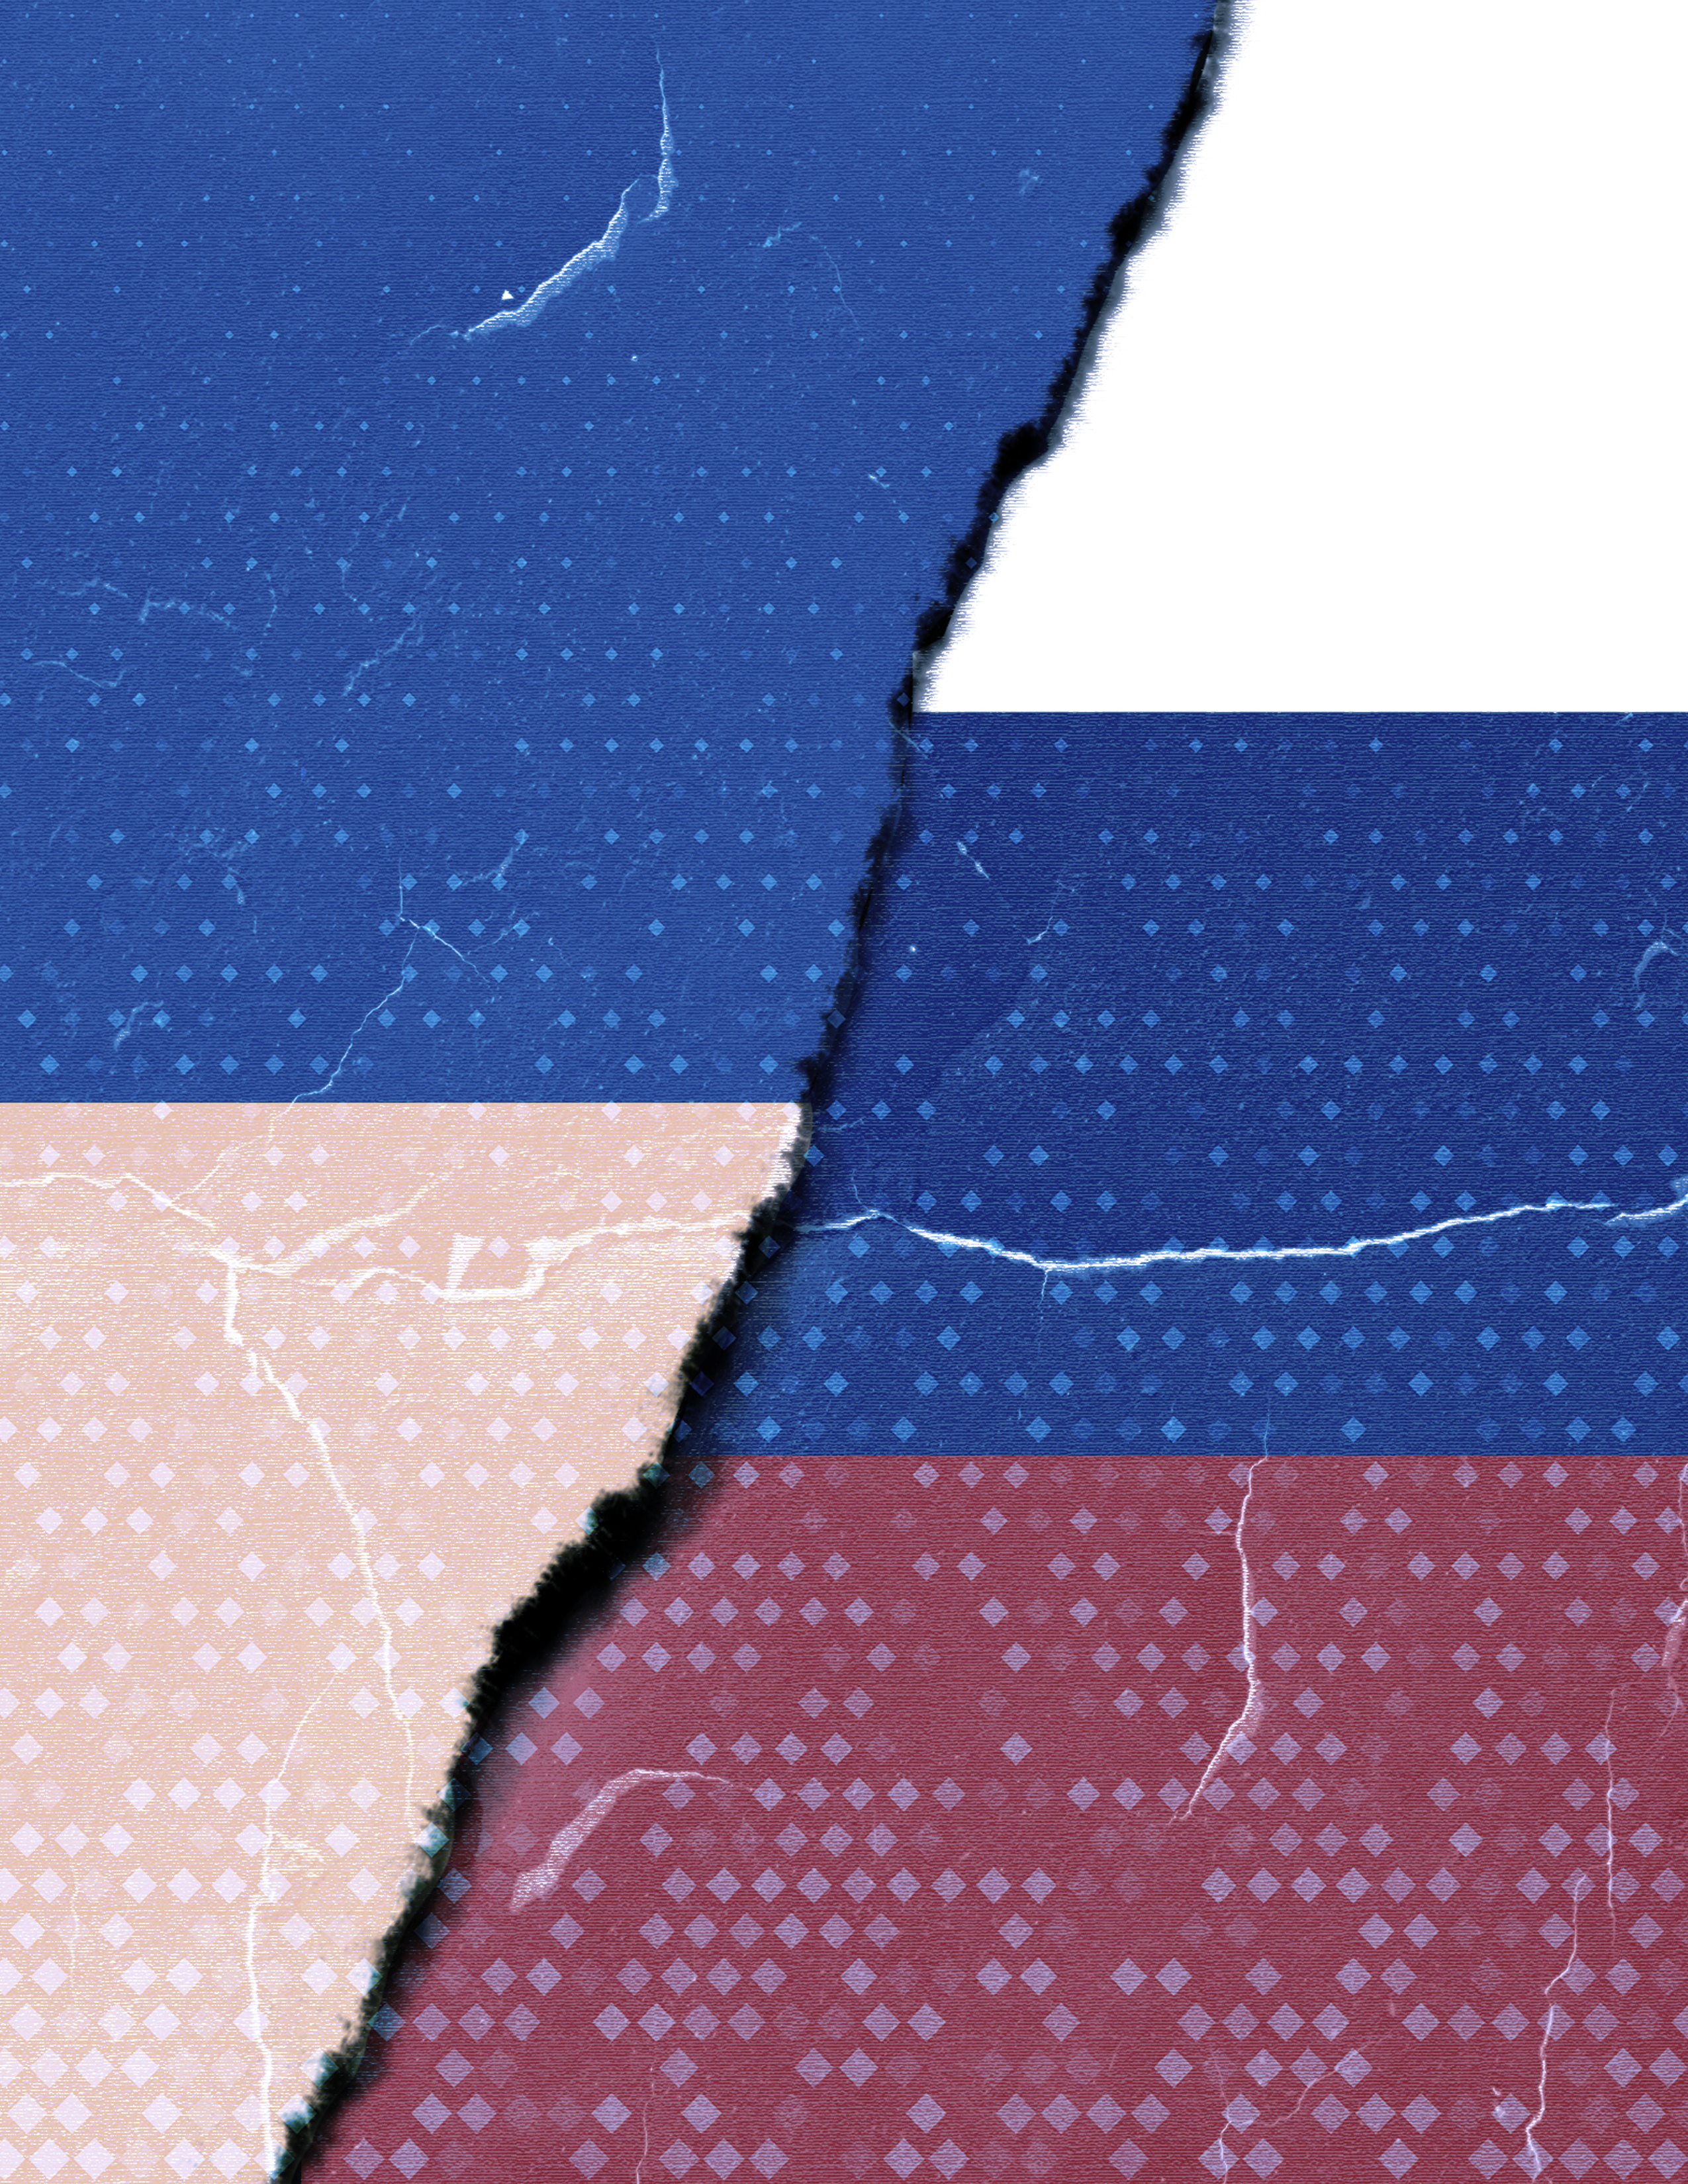 An image with a textured, torn paper effect, showing a split between Ukraine and Russia.